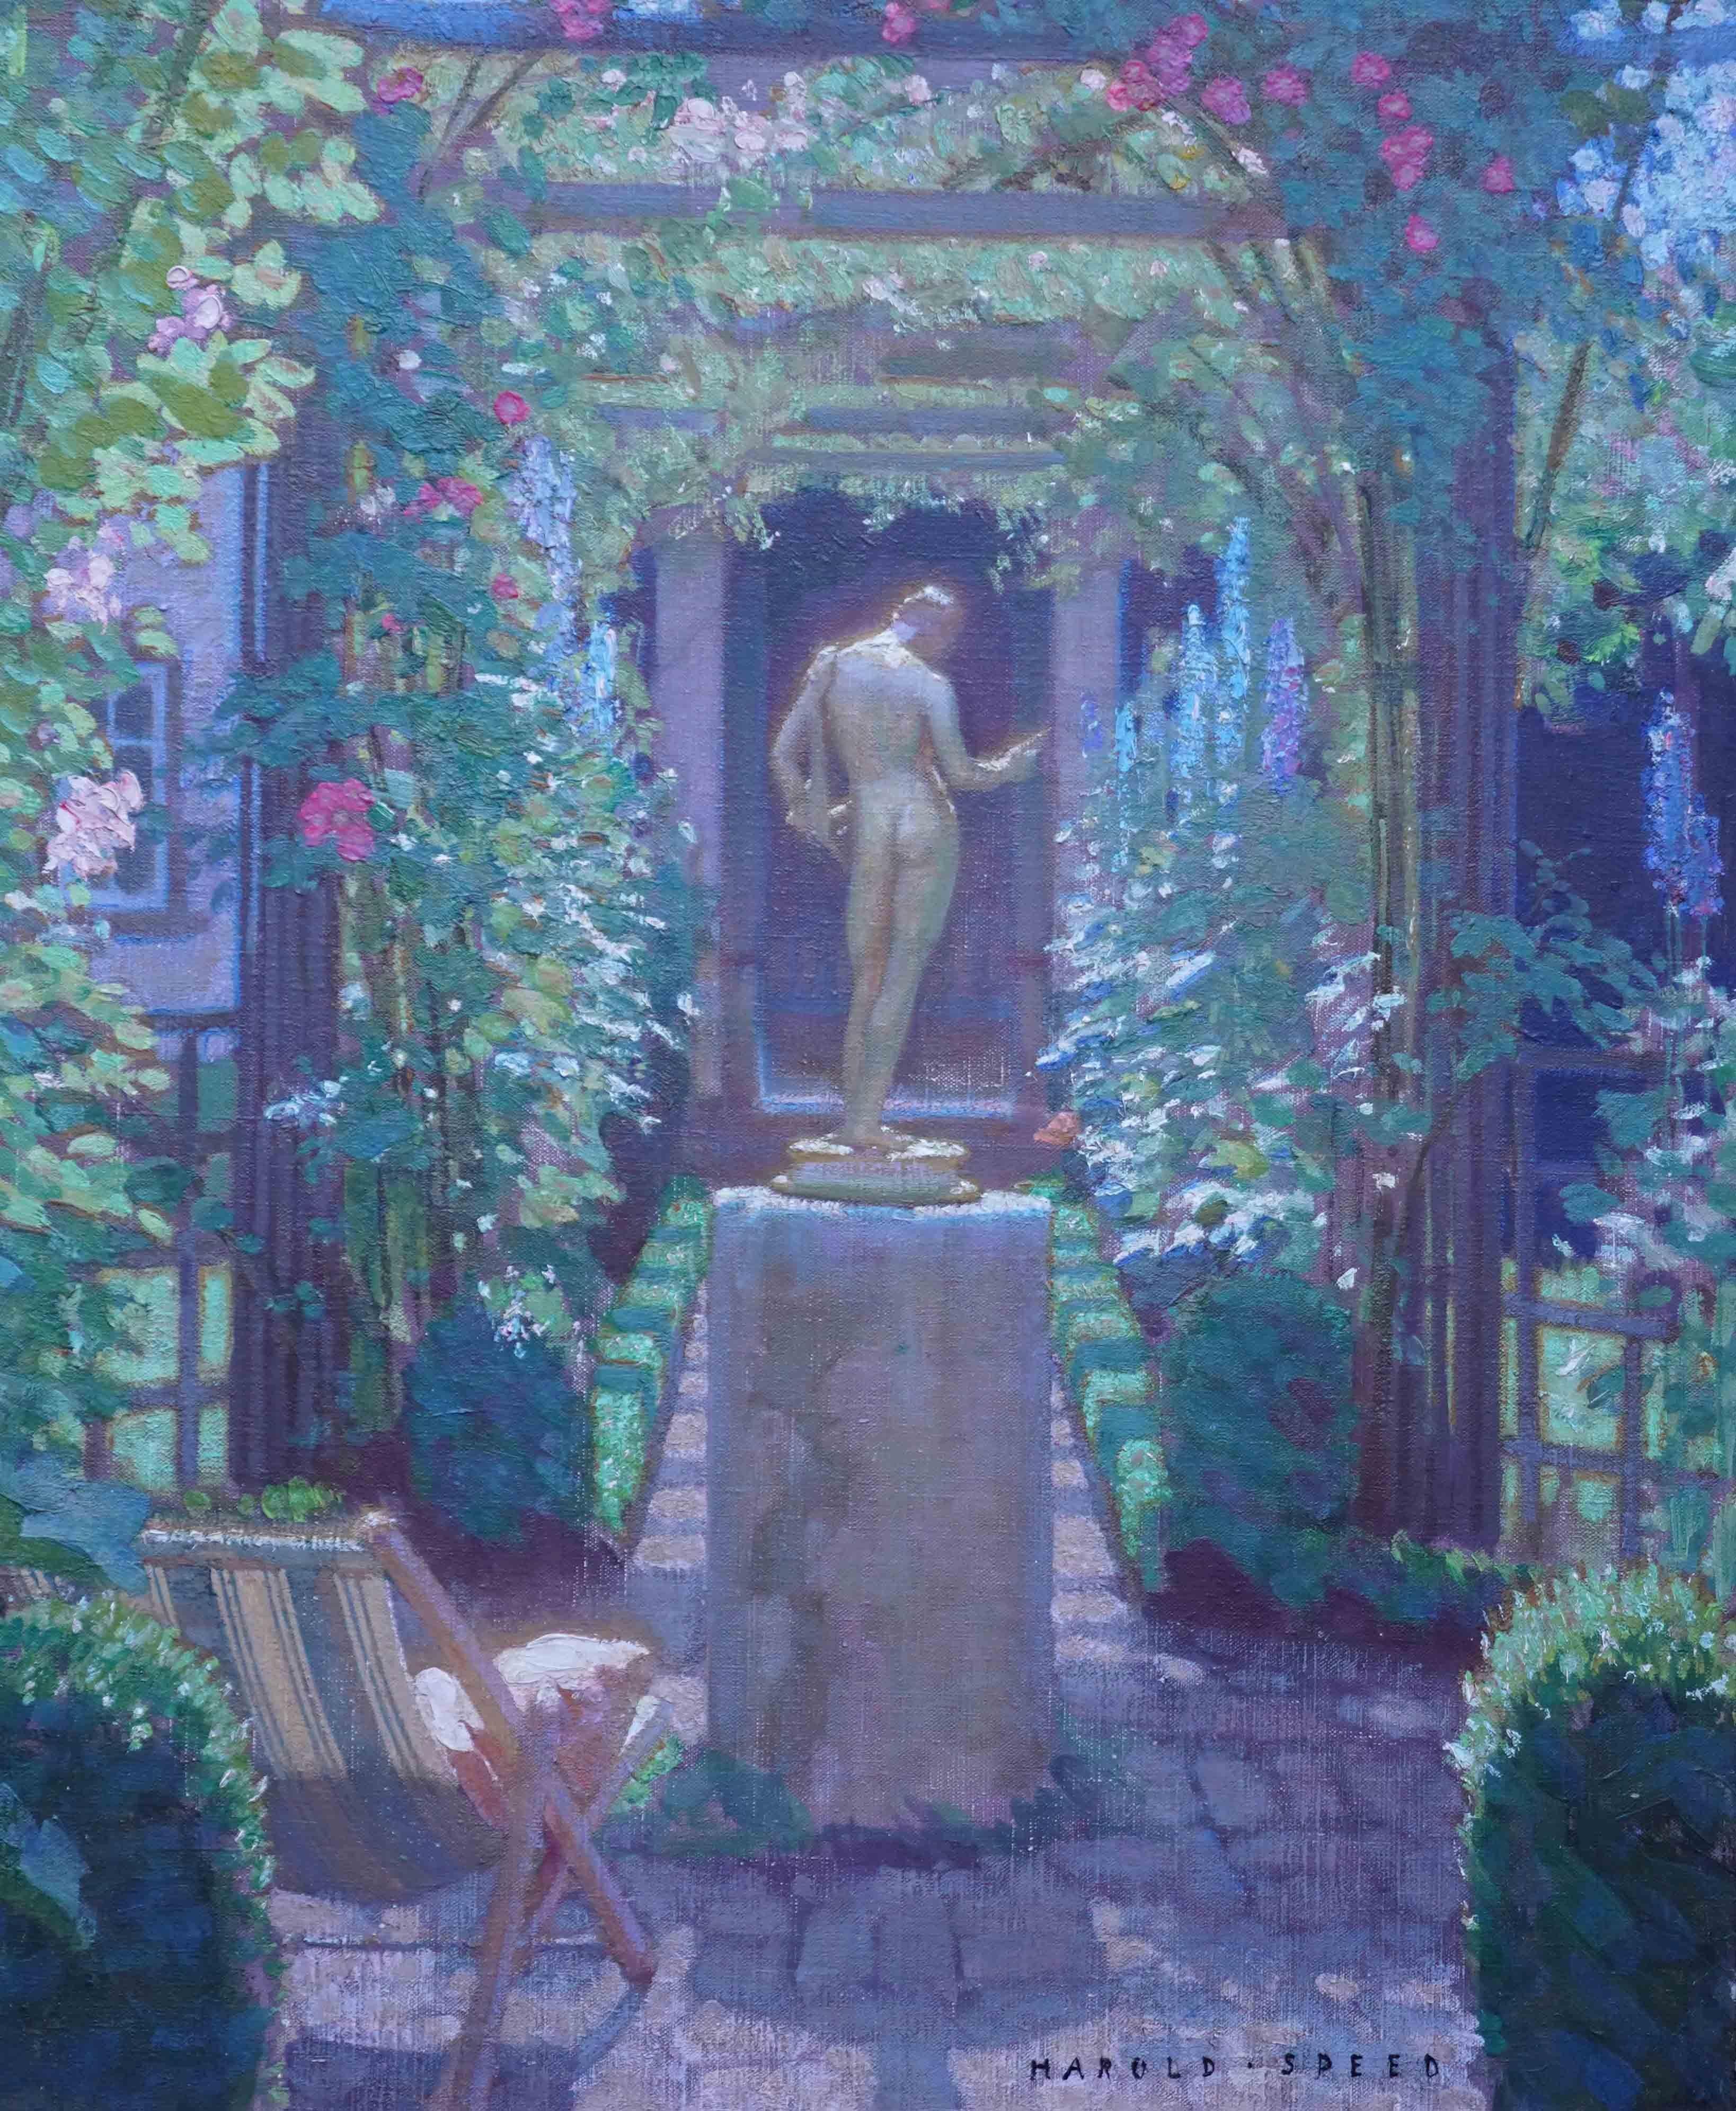 Garden with Classical Statue - British 1930's art gardenscape oil painting - Painting by Harold Speed